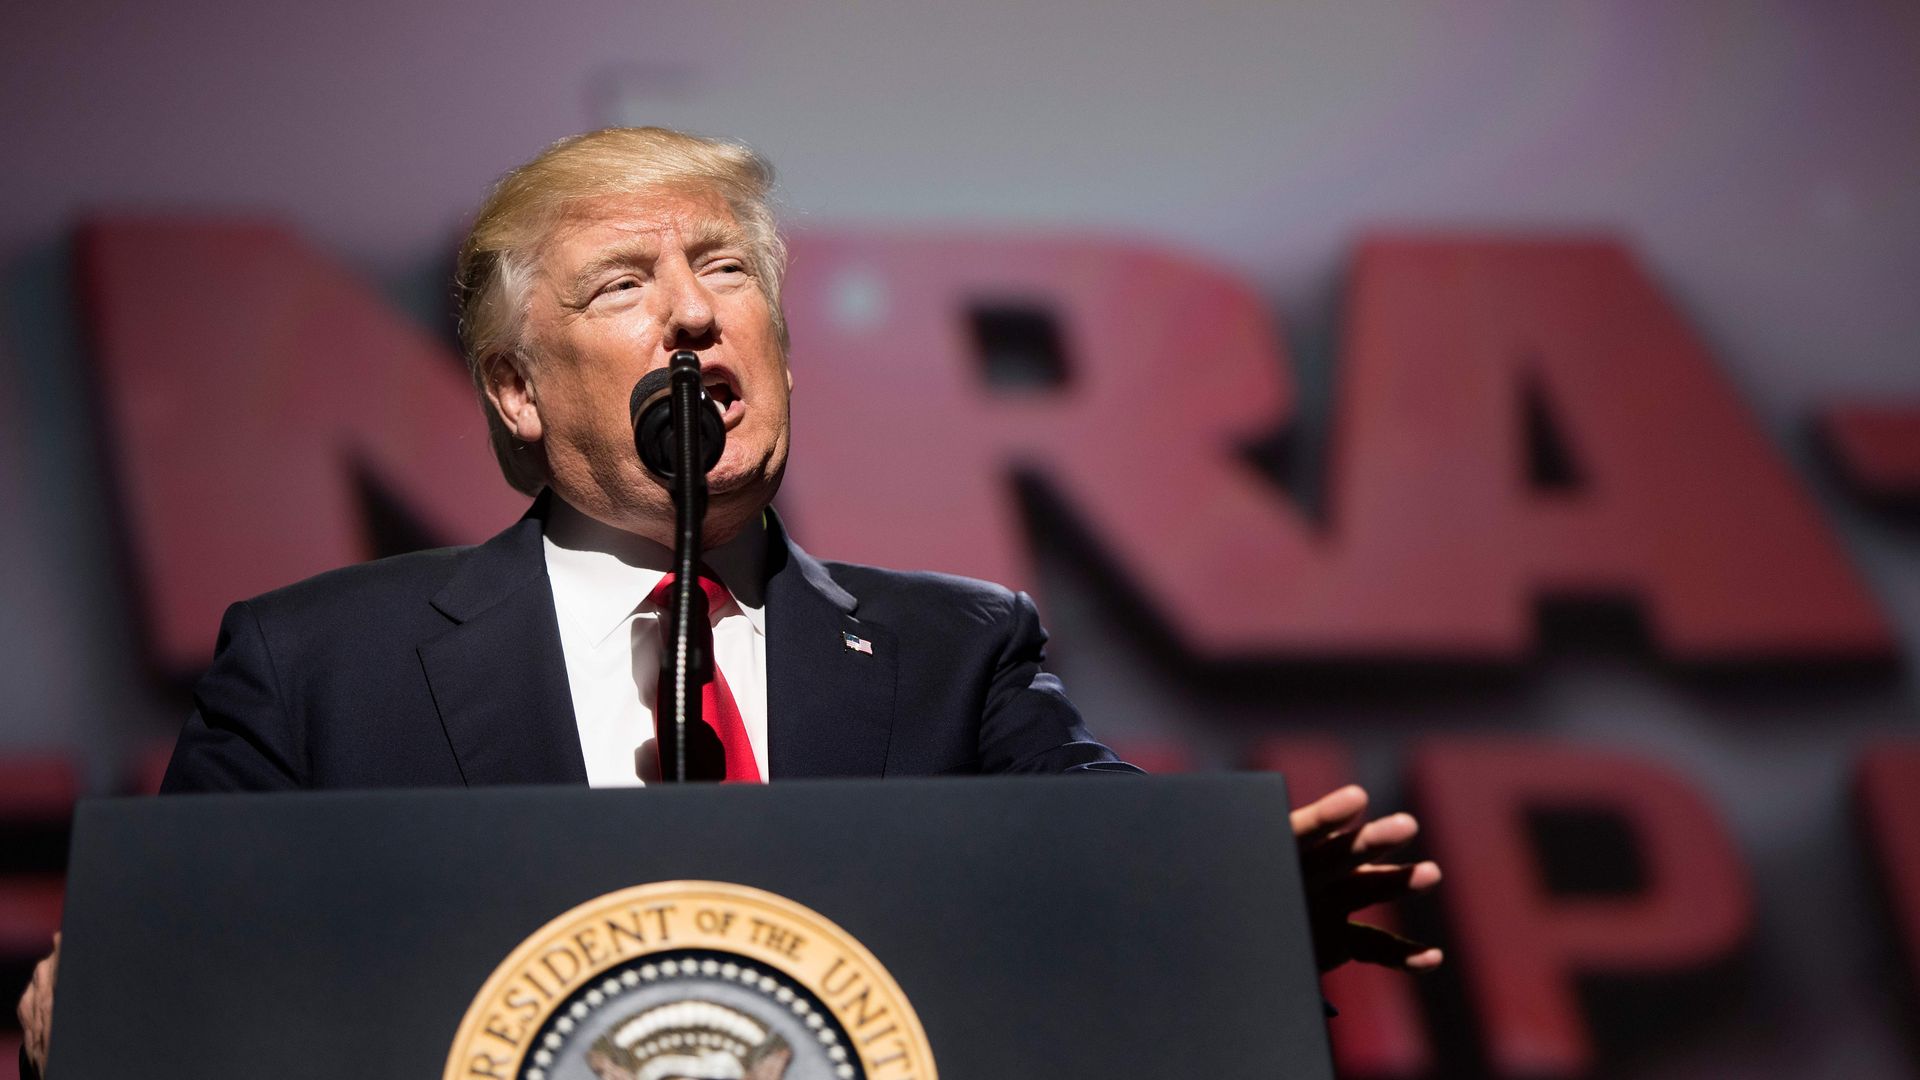 Donald Trump in a suit and red tie talking into a microphone in front of a blurred NRA sign